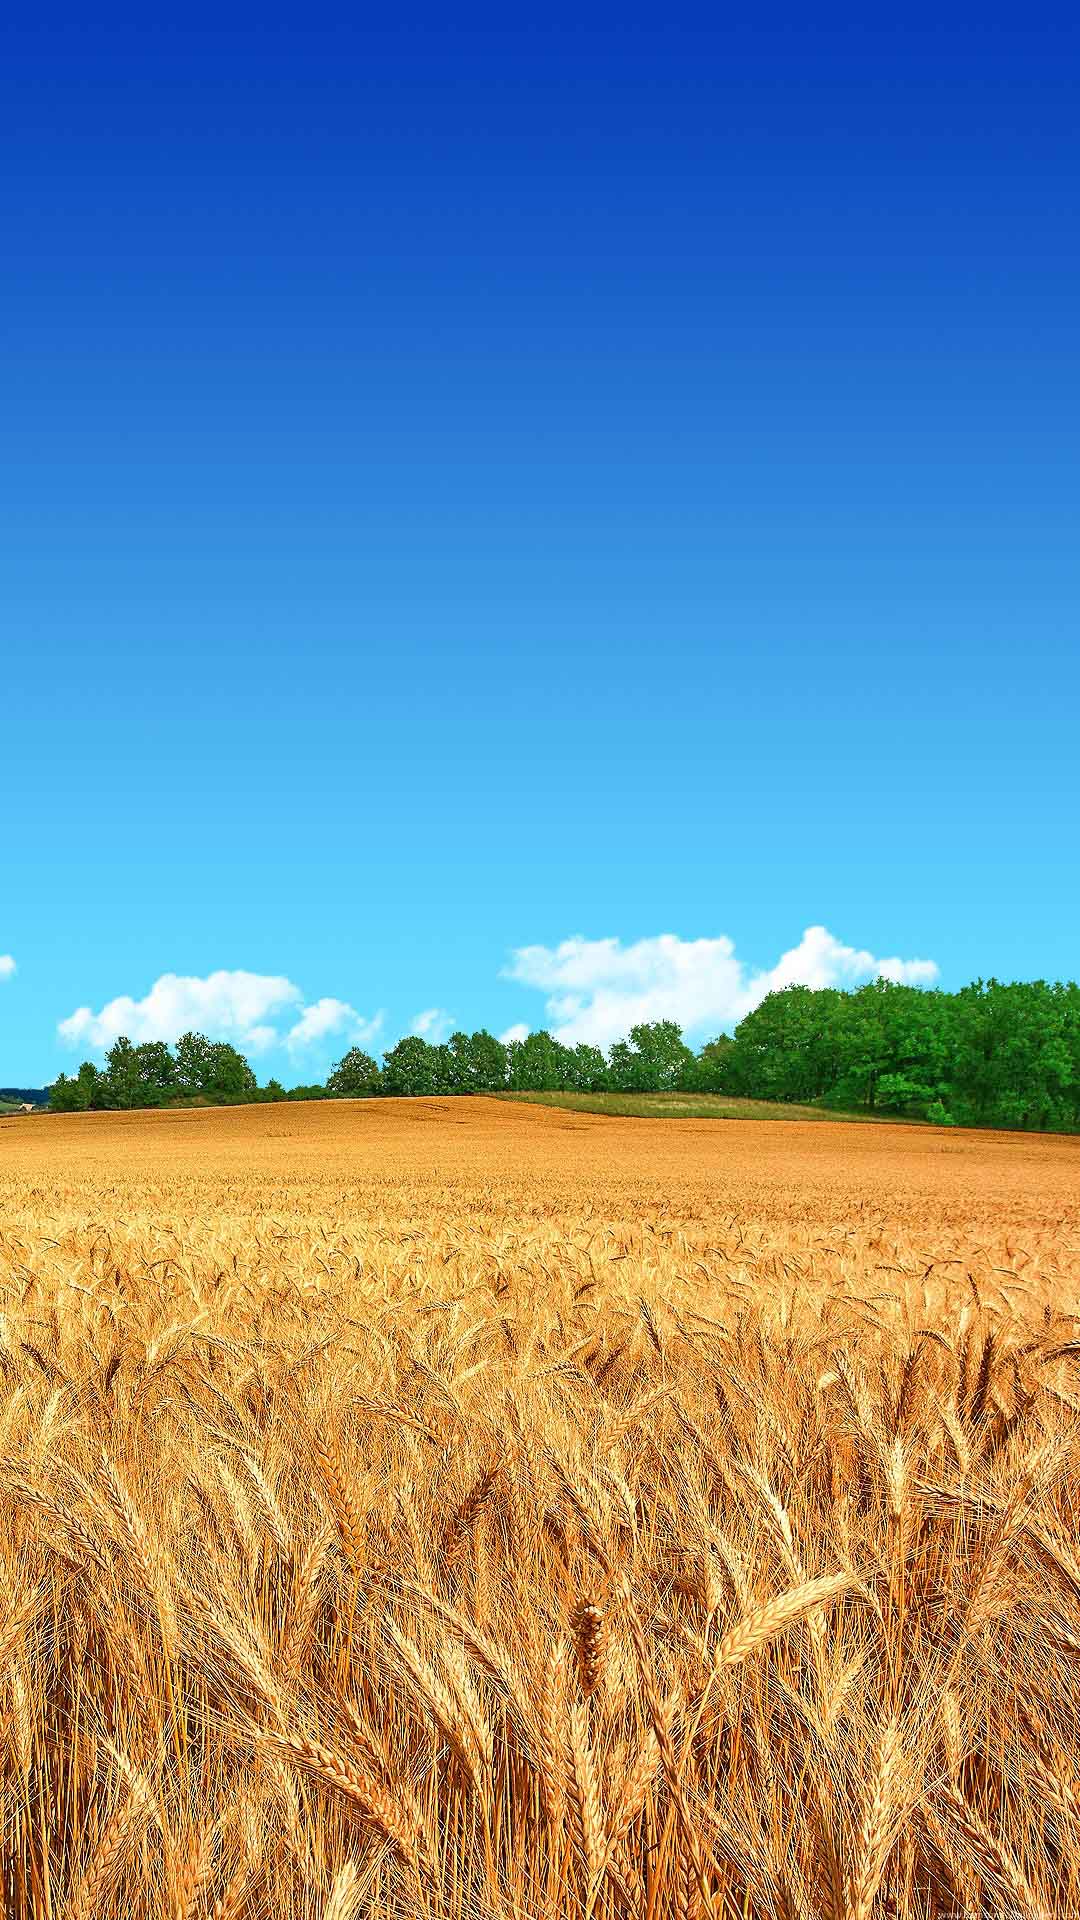 Samsung Galaxy J7 Wallpapers Farmer fields android